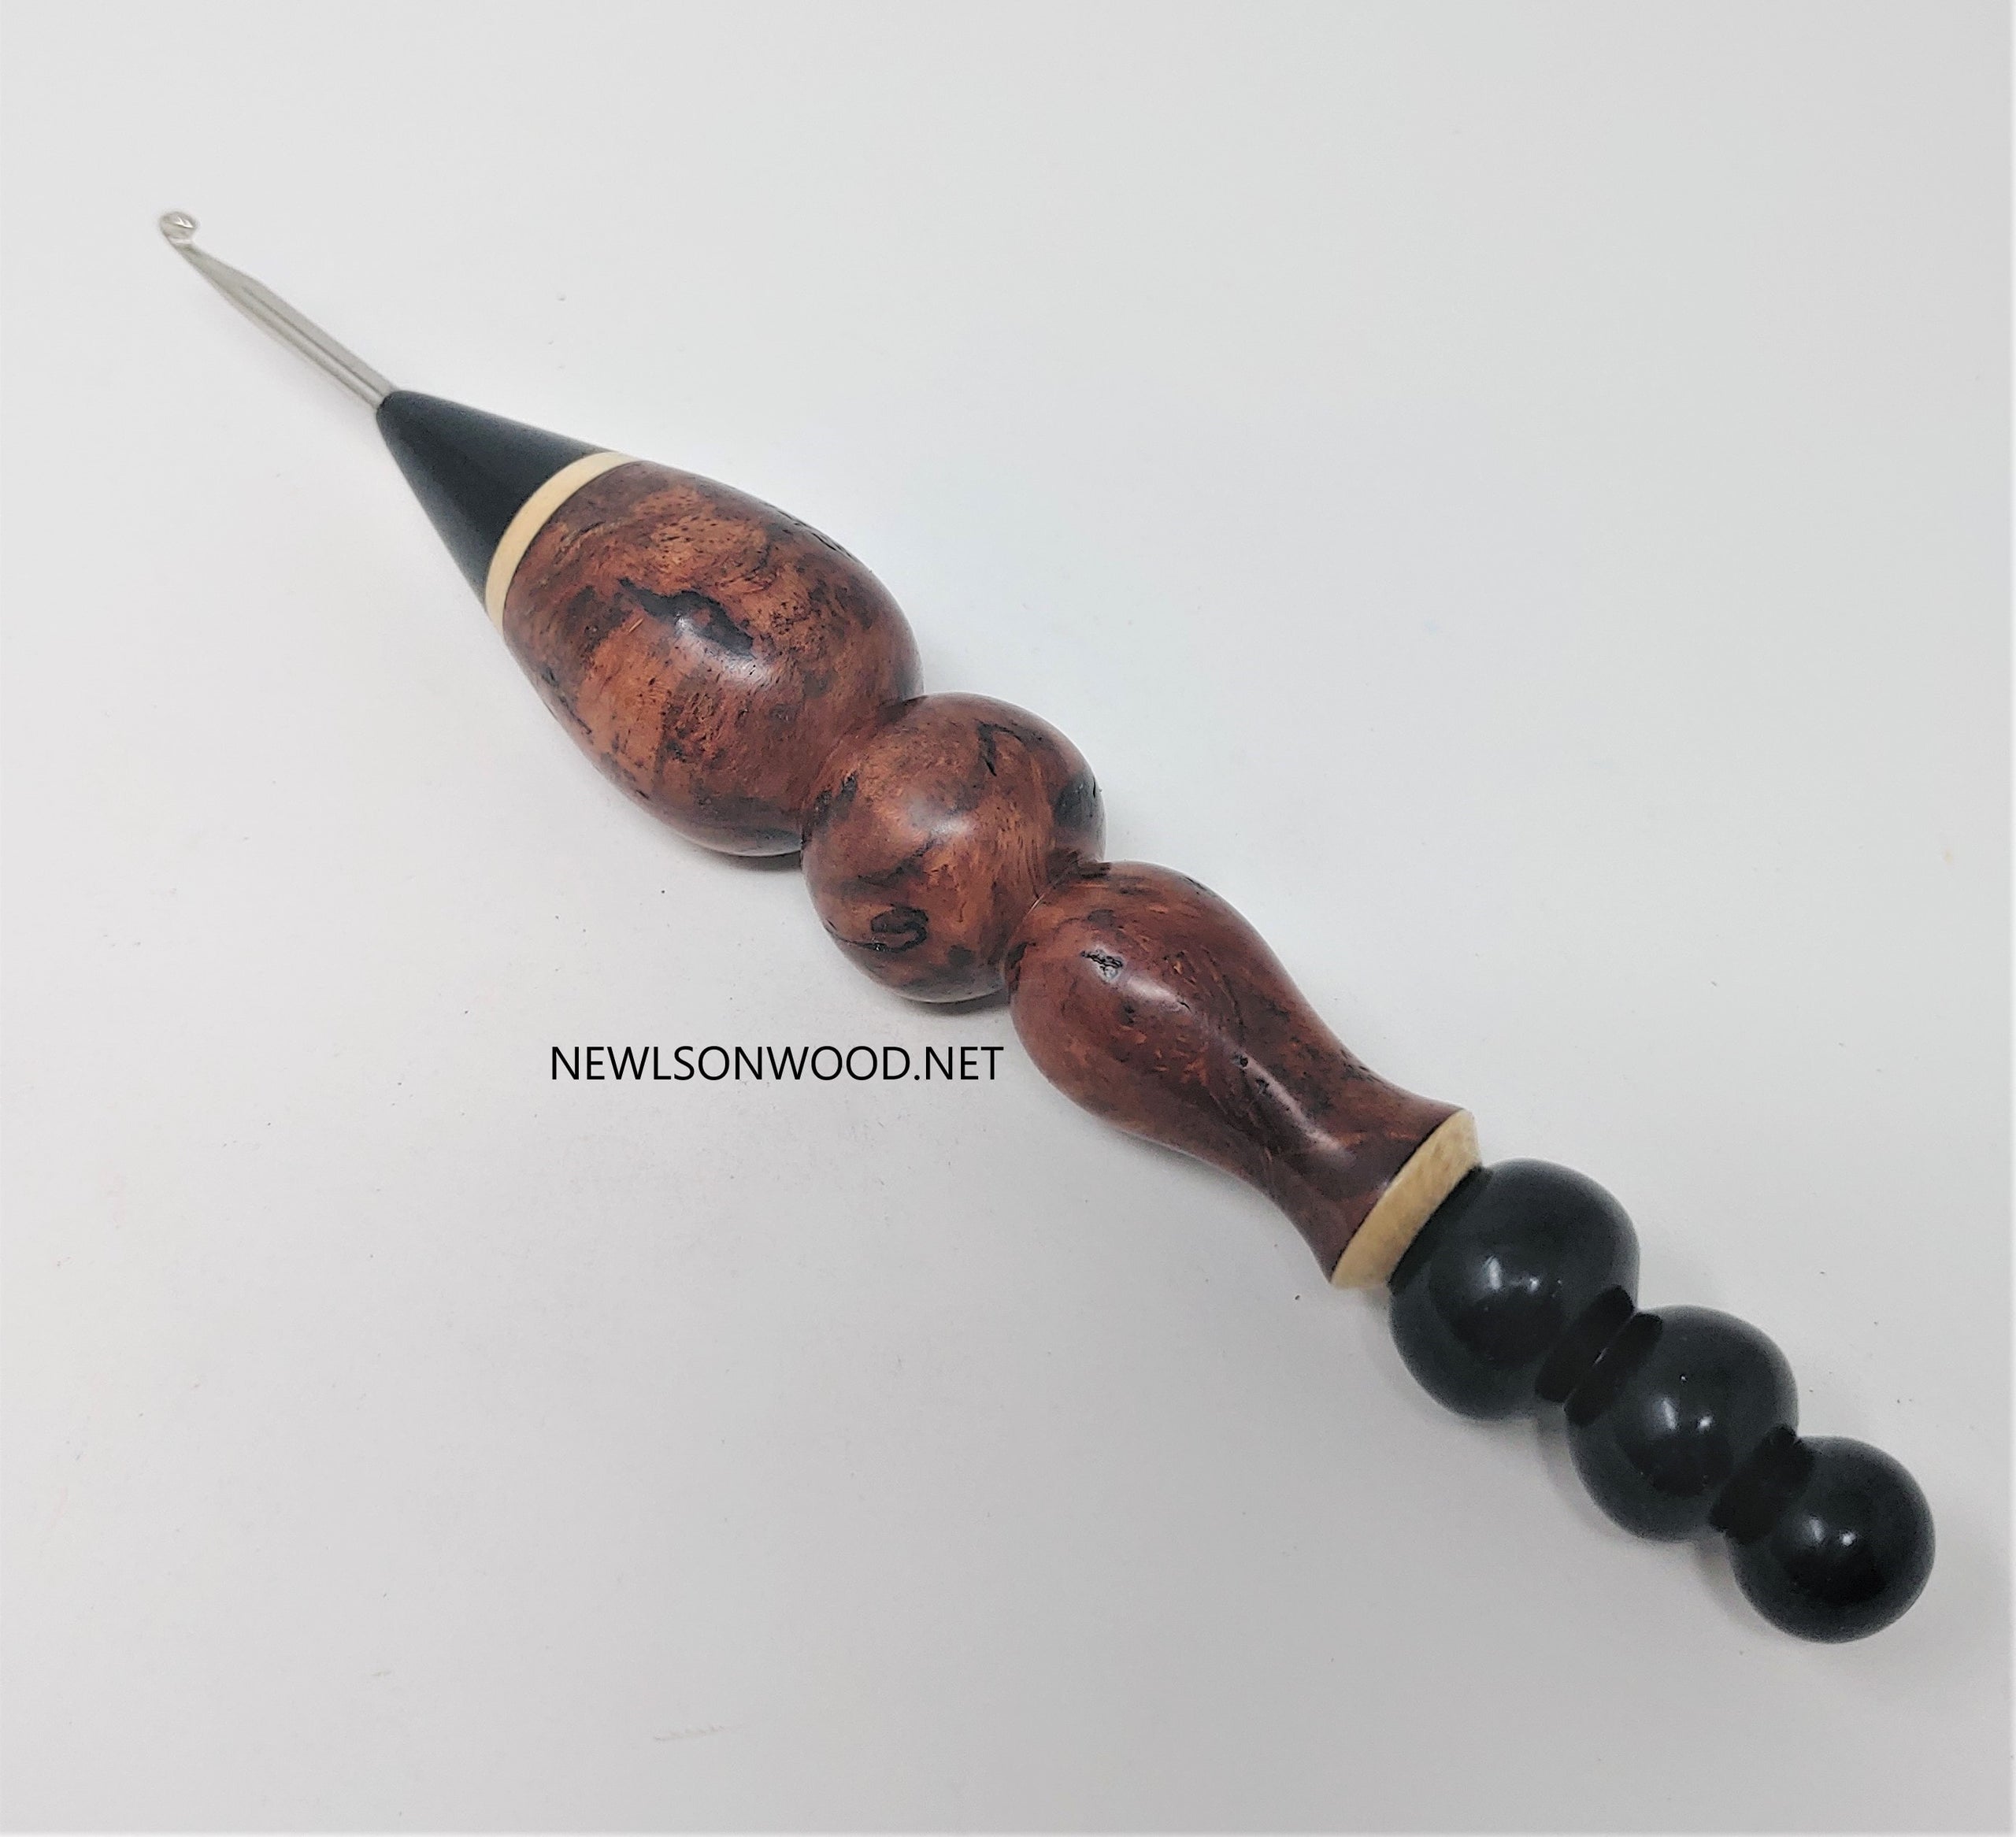 Wooden Crochet Asian Pan Burl with Ebony Handcrafted NELSONWOOD